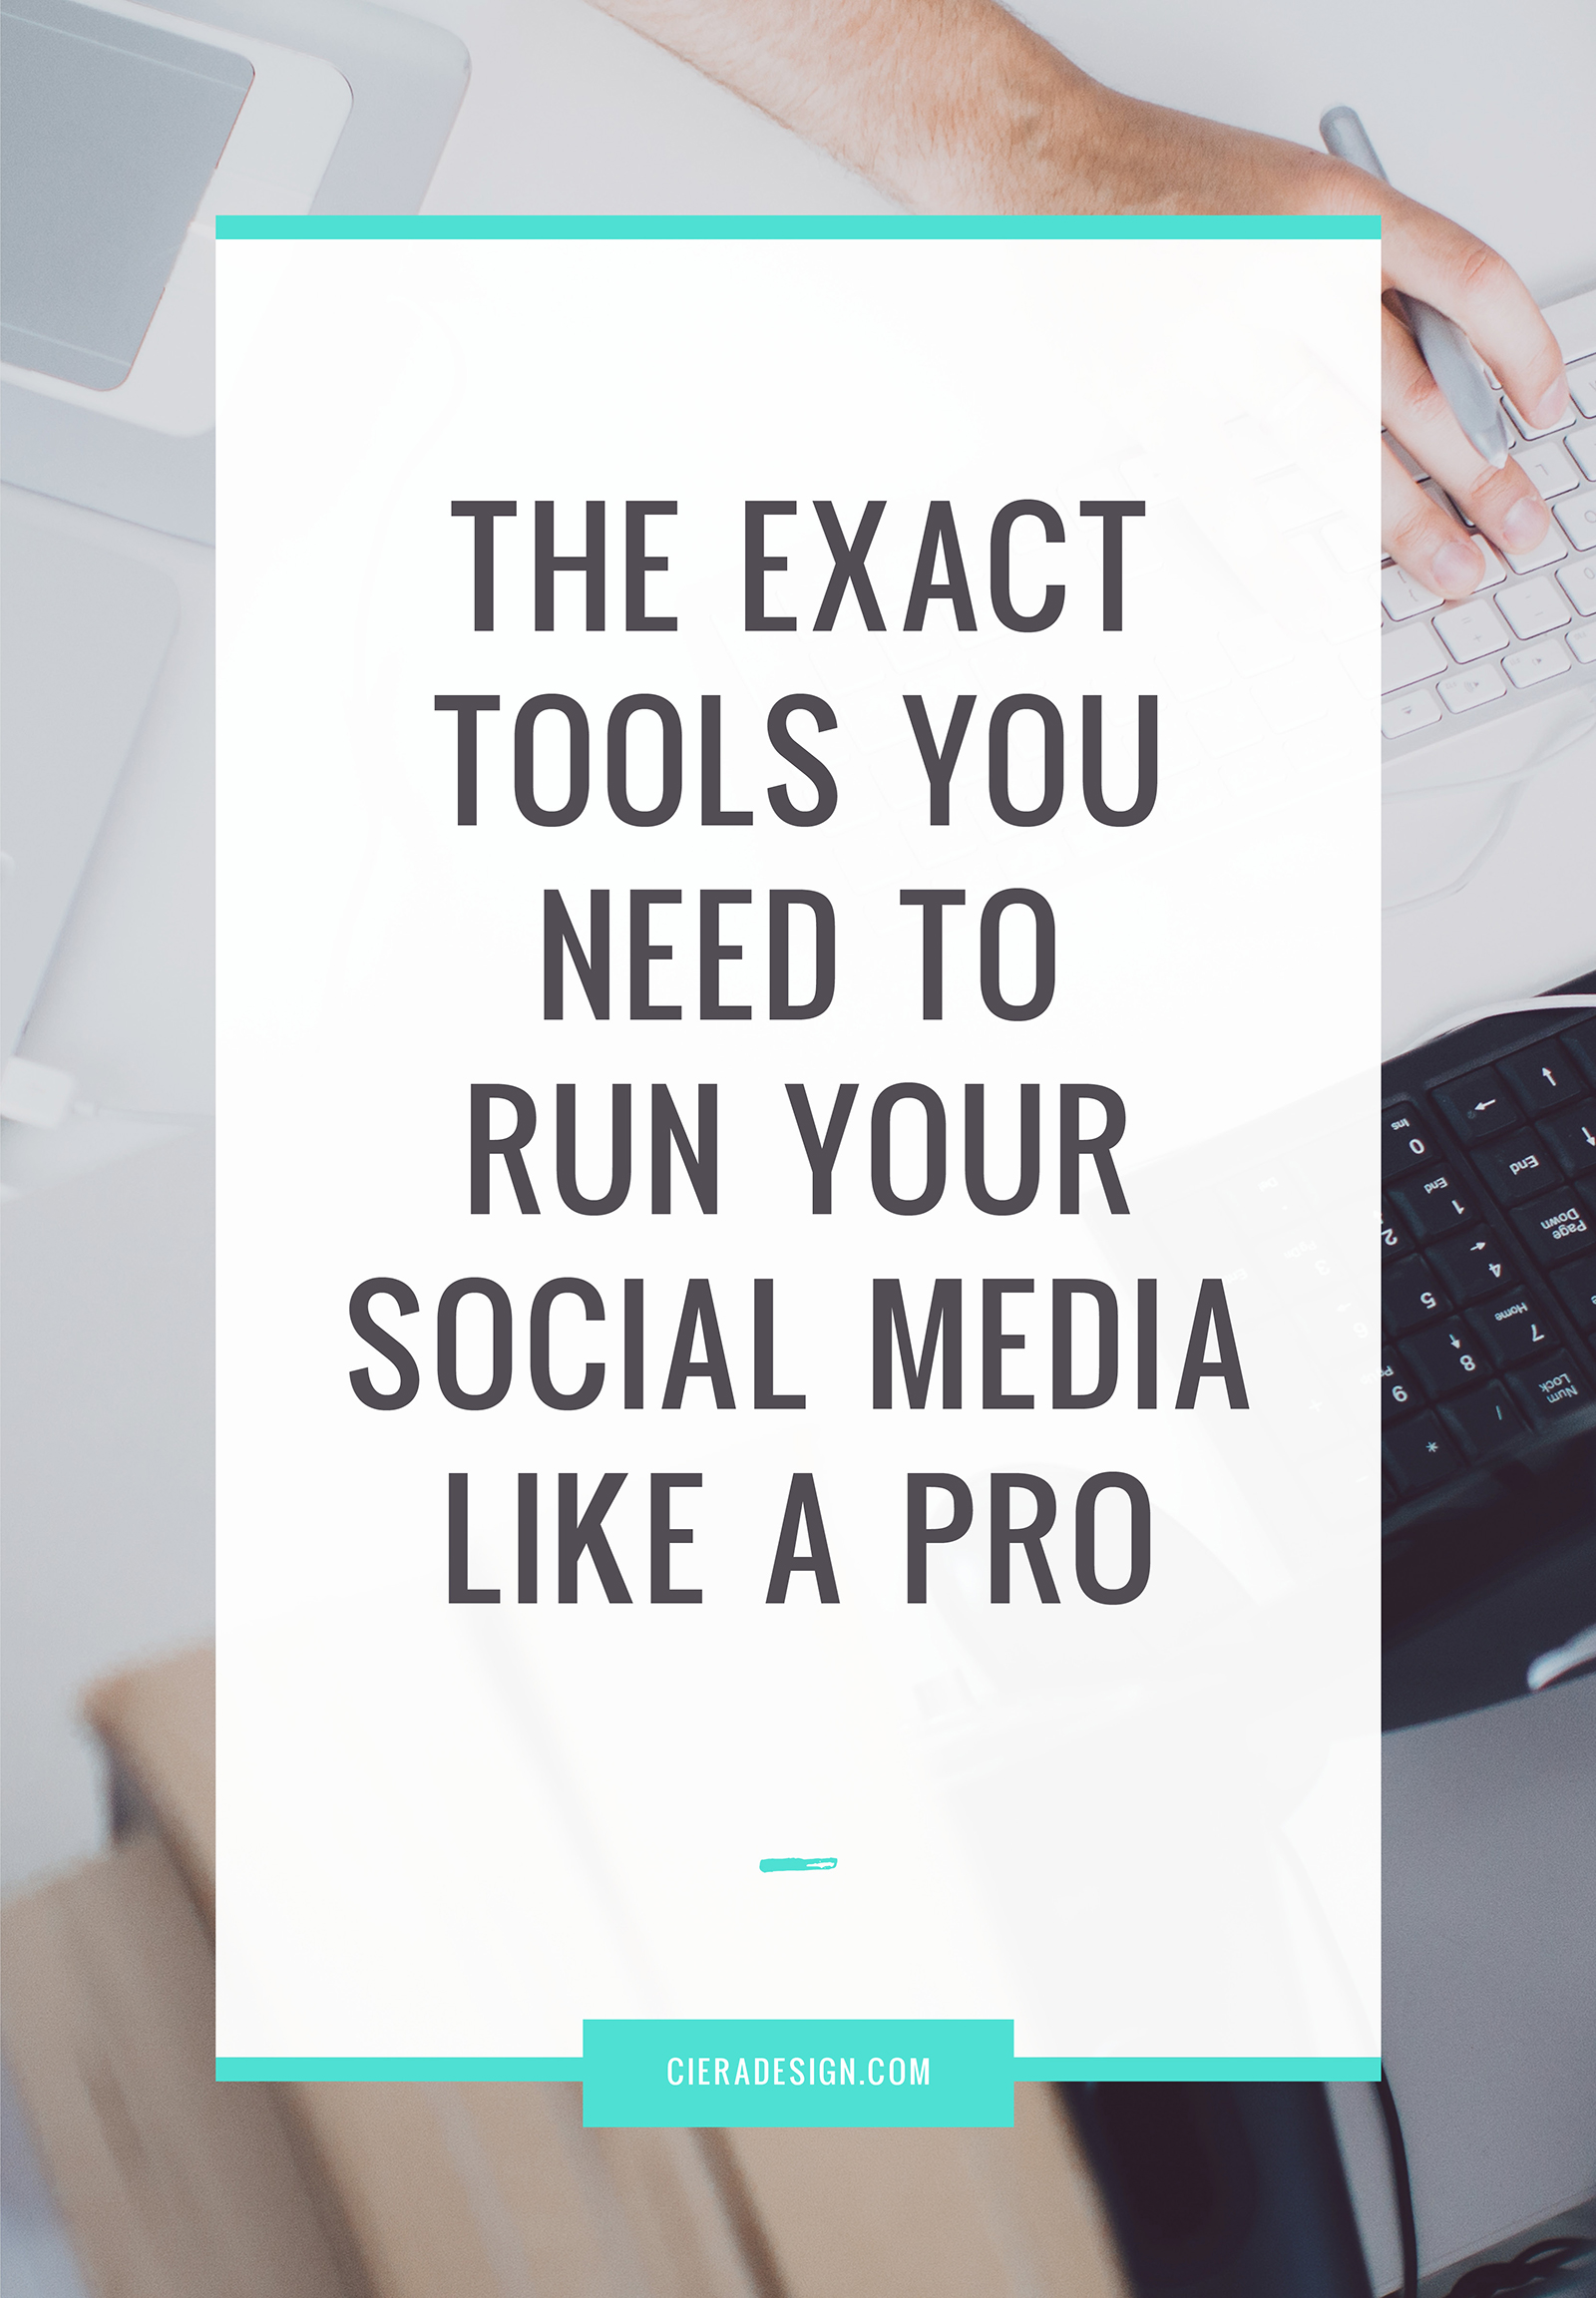 Looking for better and more effective ways to run your social media? Avoid the trial and error and click through for the exact tools you need run your social media like a pro.